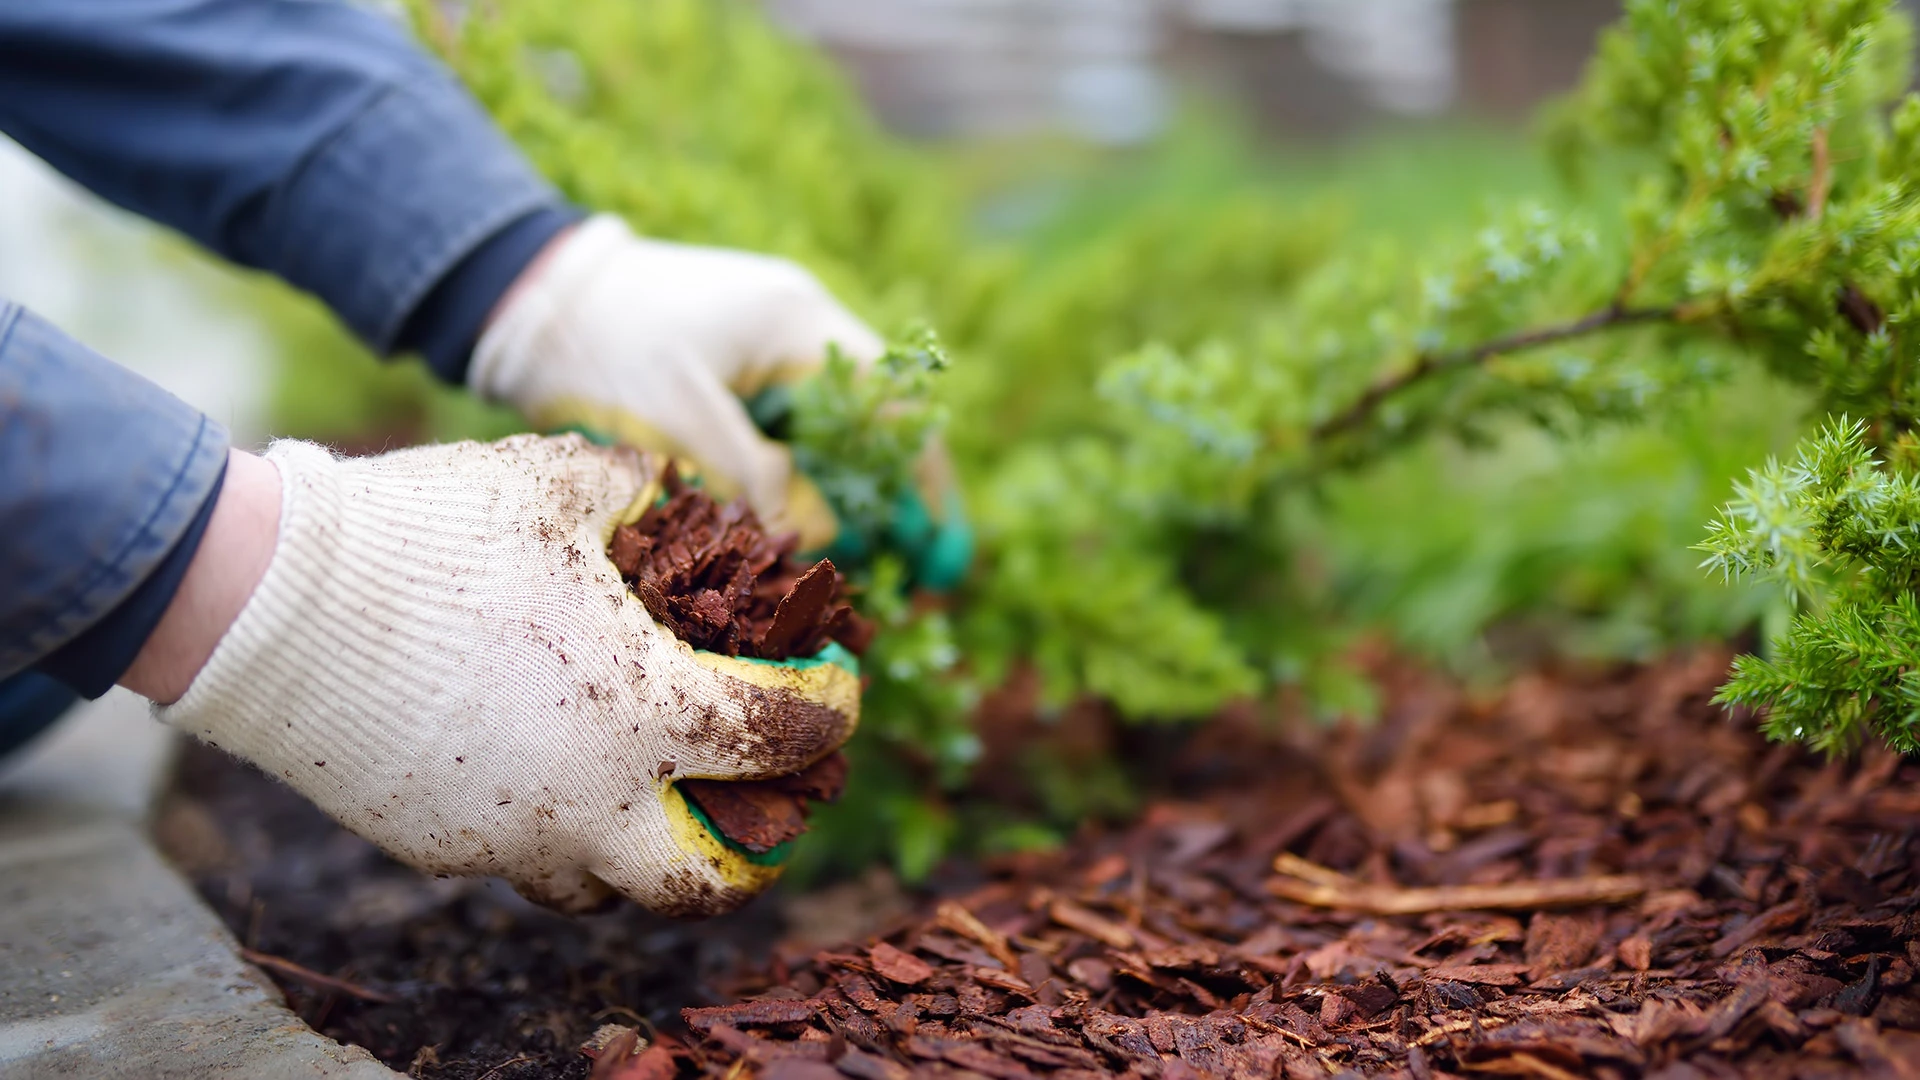 Mulch - What It Does for Your Landscape